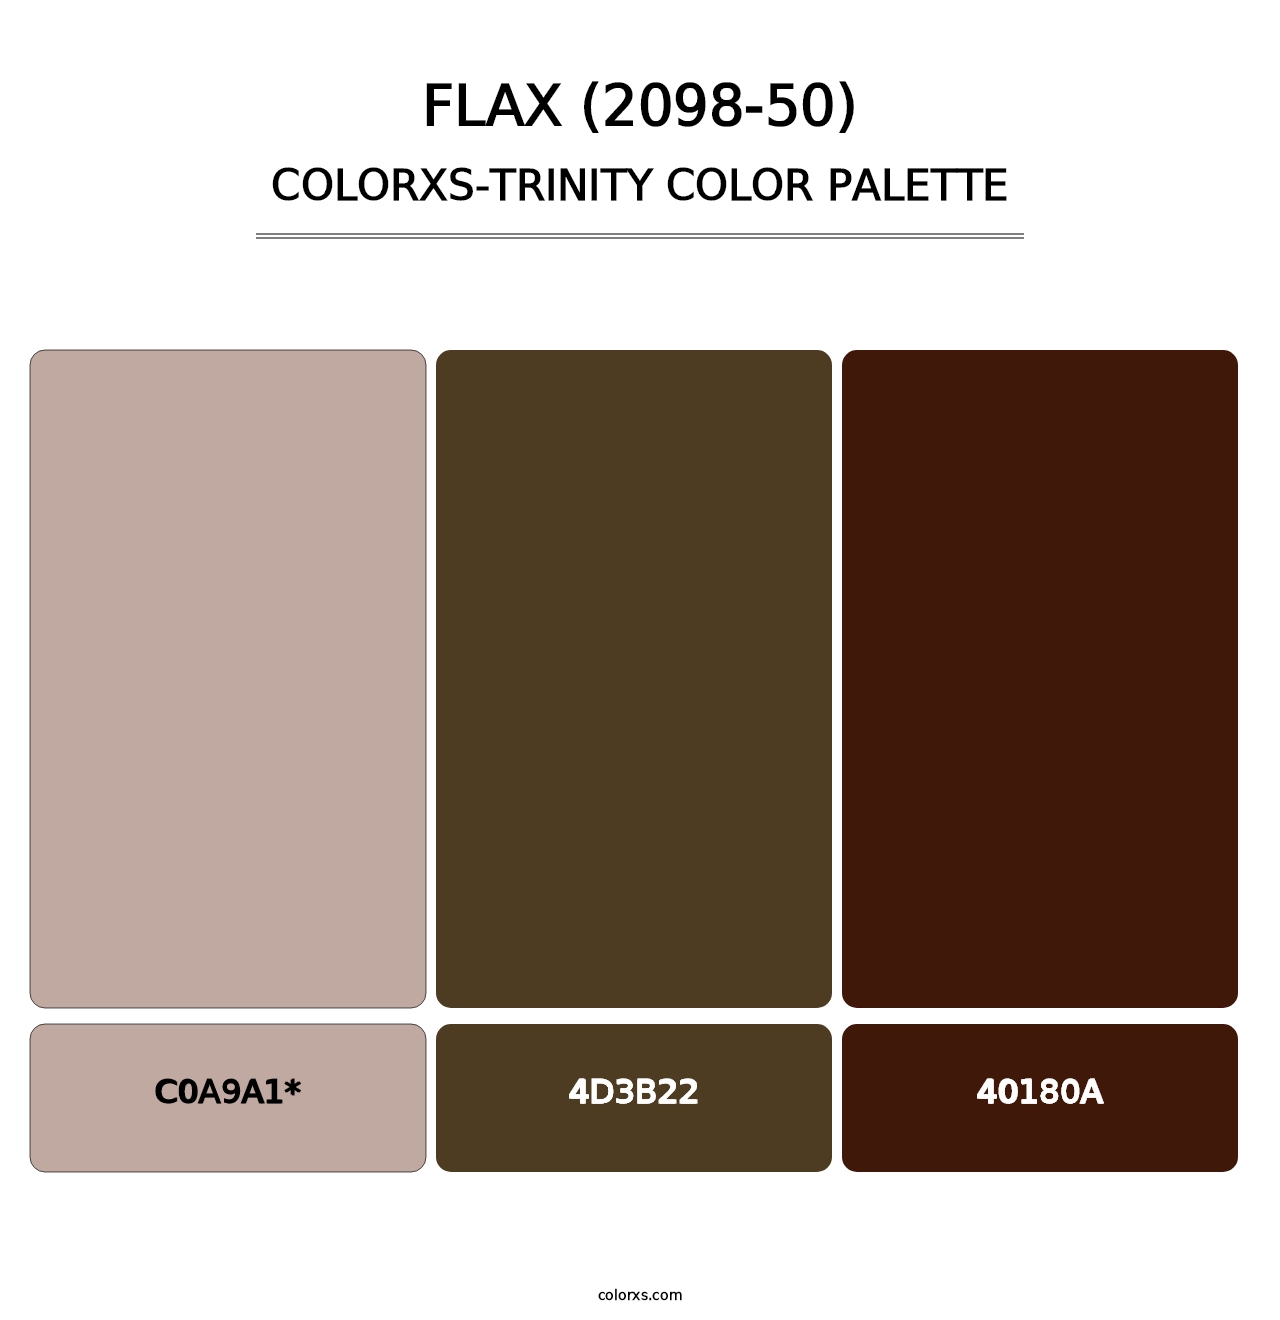 Flax (2098-50) - Colorxs Trinity Palette